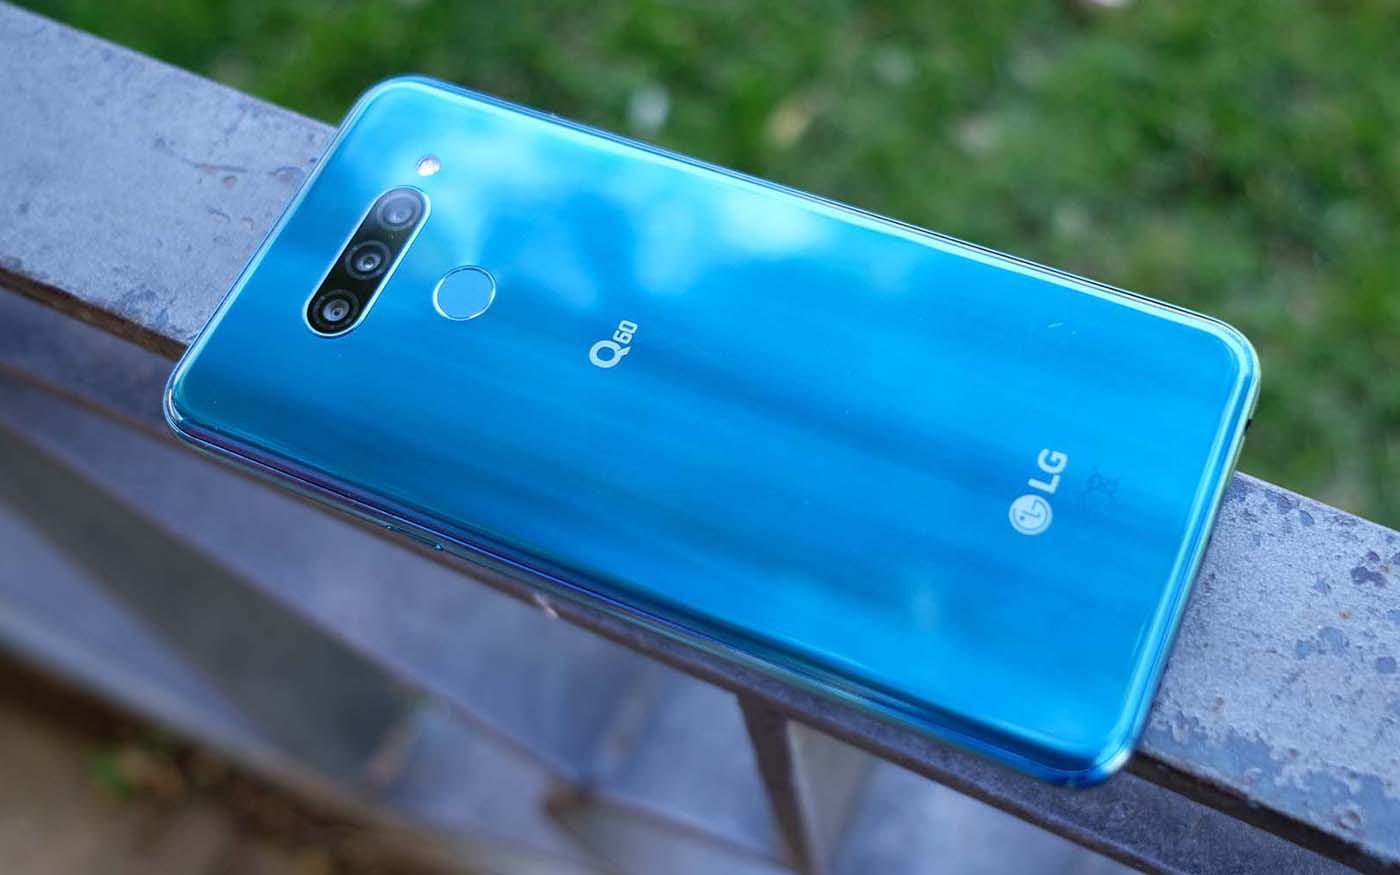 Android 10 may arrive on the LG K50 and Q60 only at the end of the year